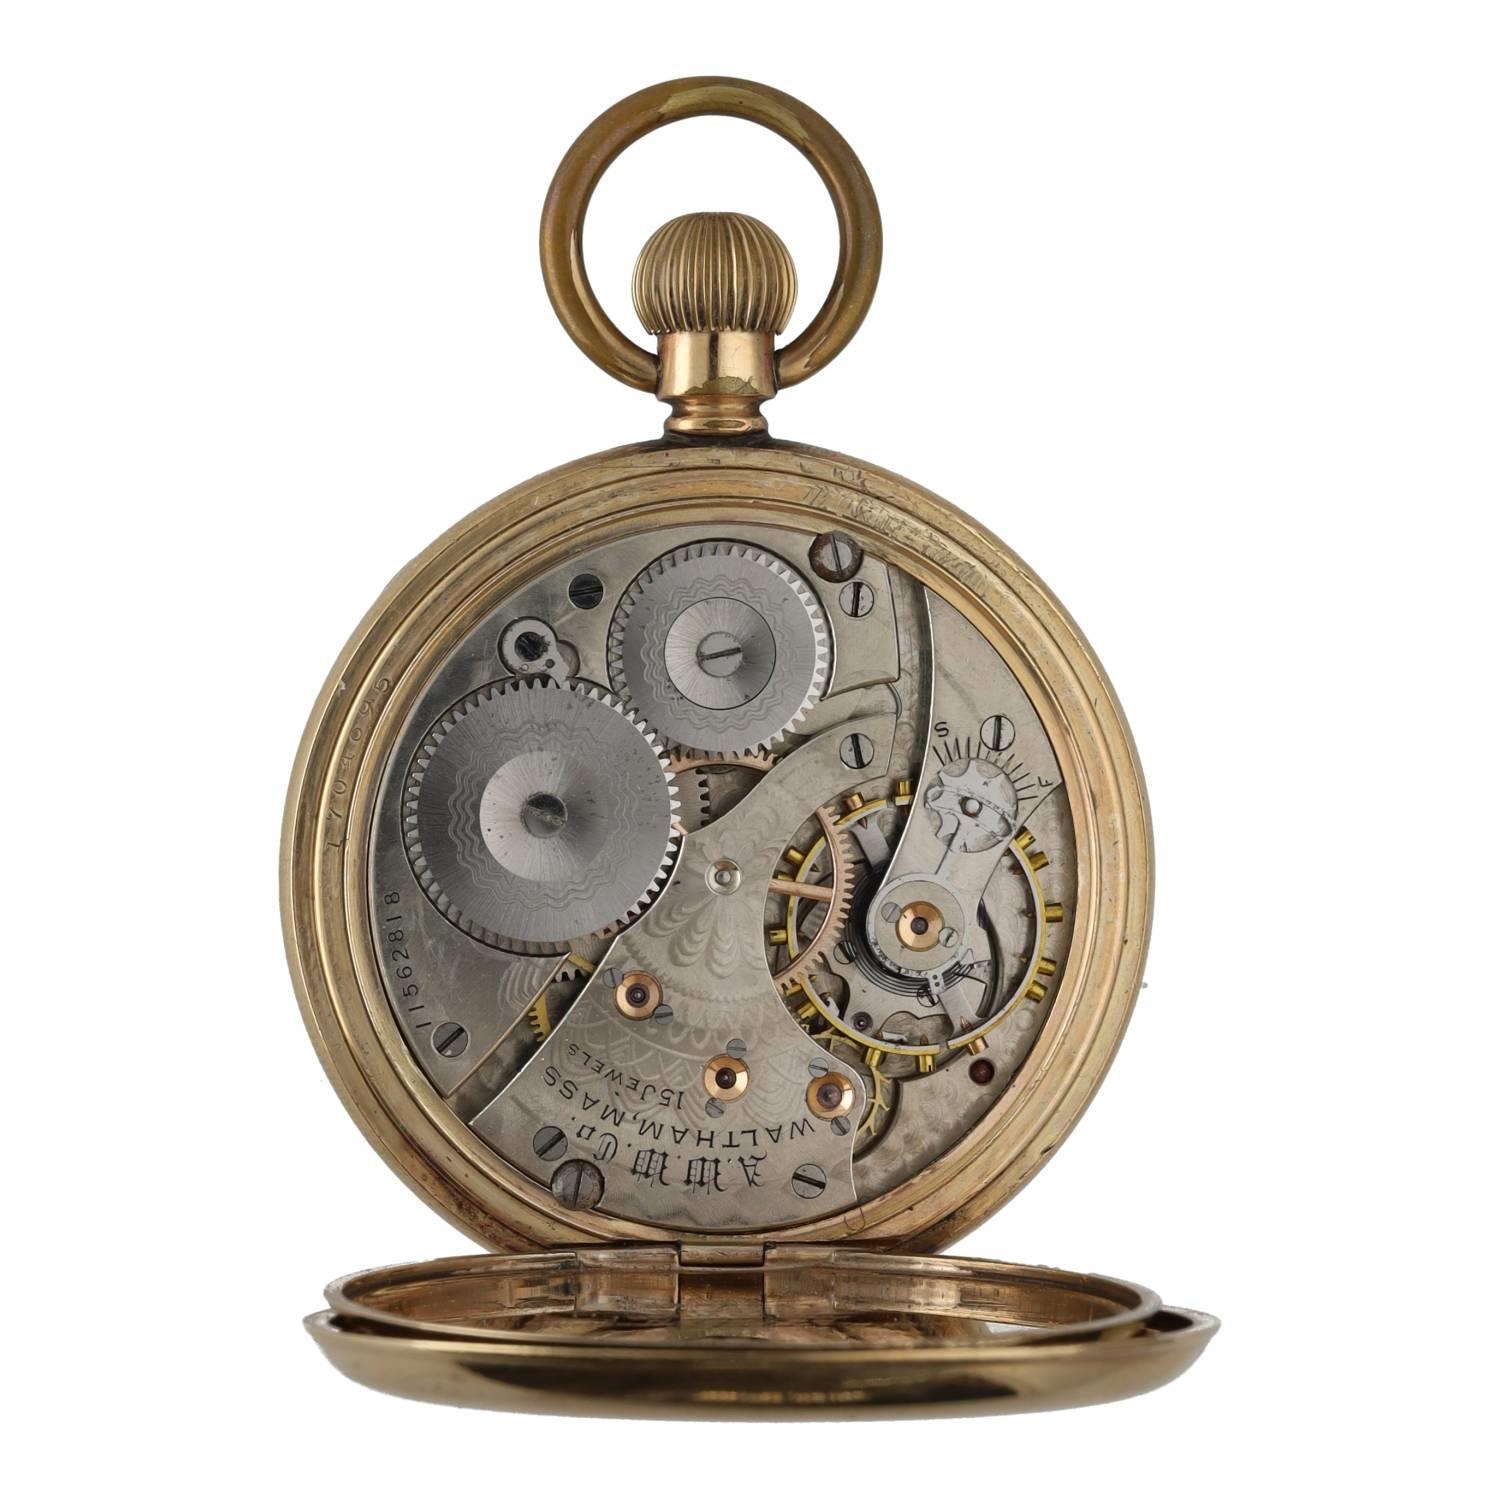 American Waltham gold plated lever pocket watch, circa 1902, serial no. 11562818, signed 15 jewel - Image 2 of 3